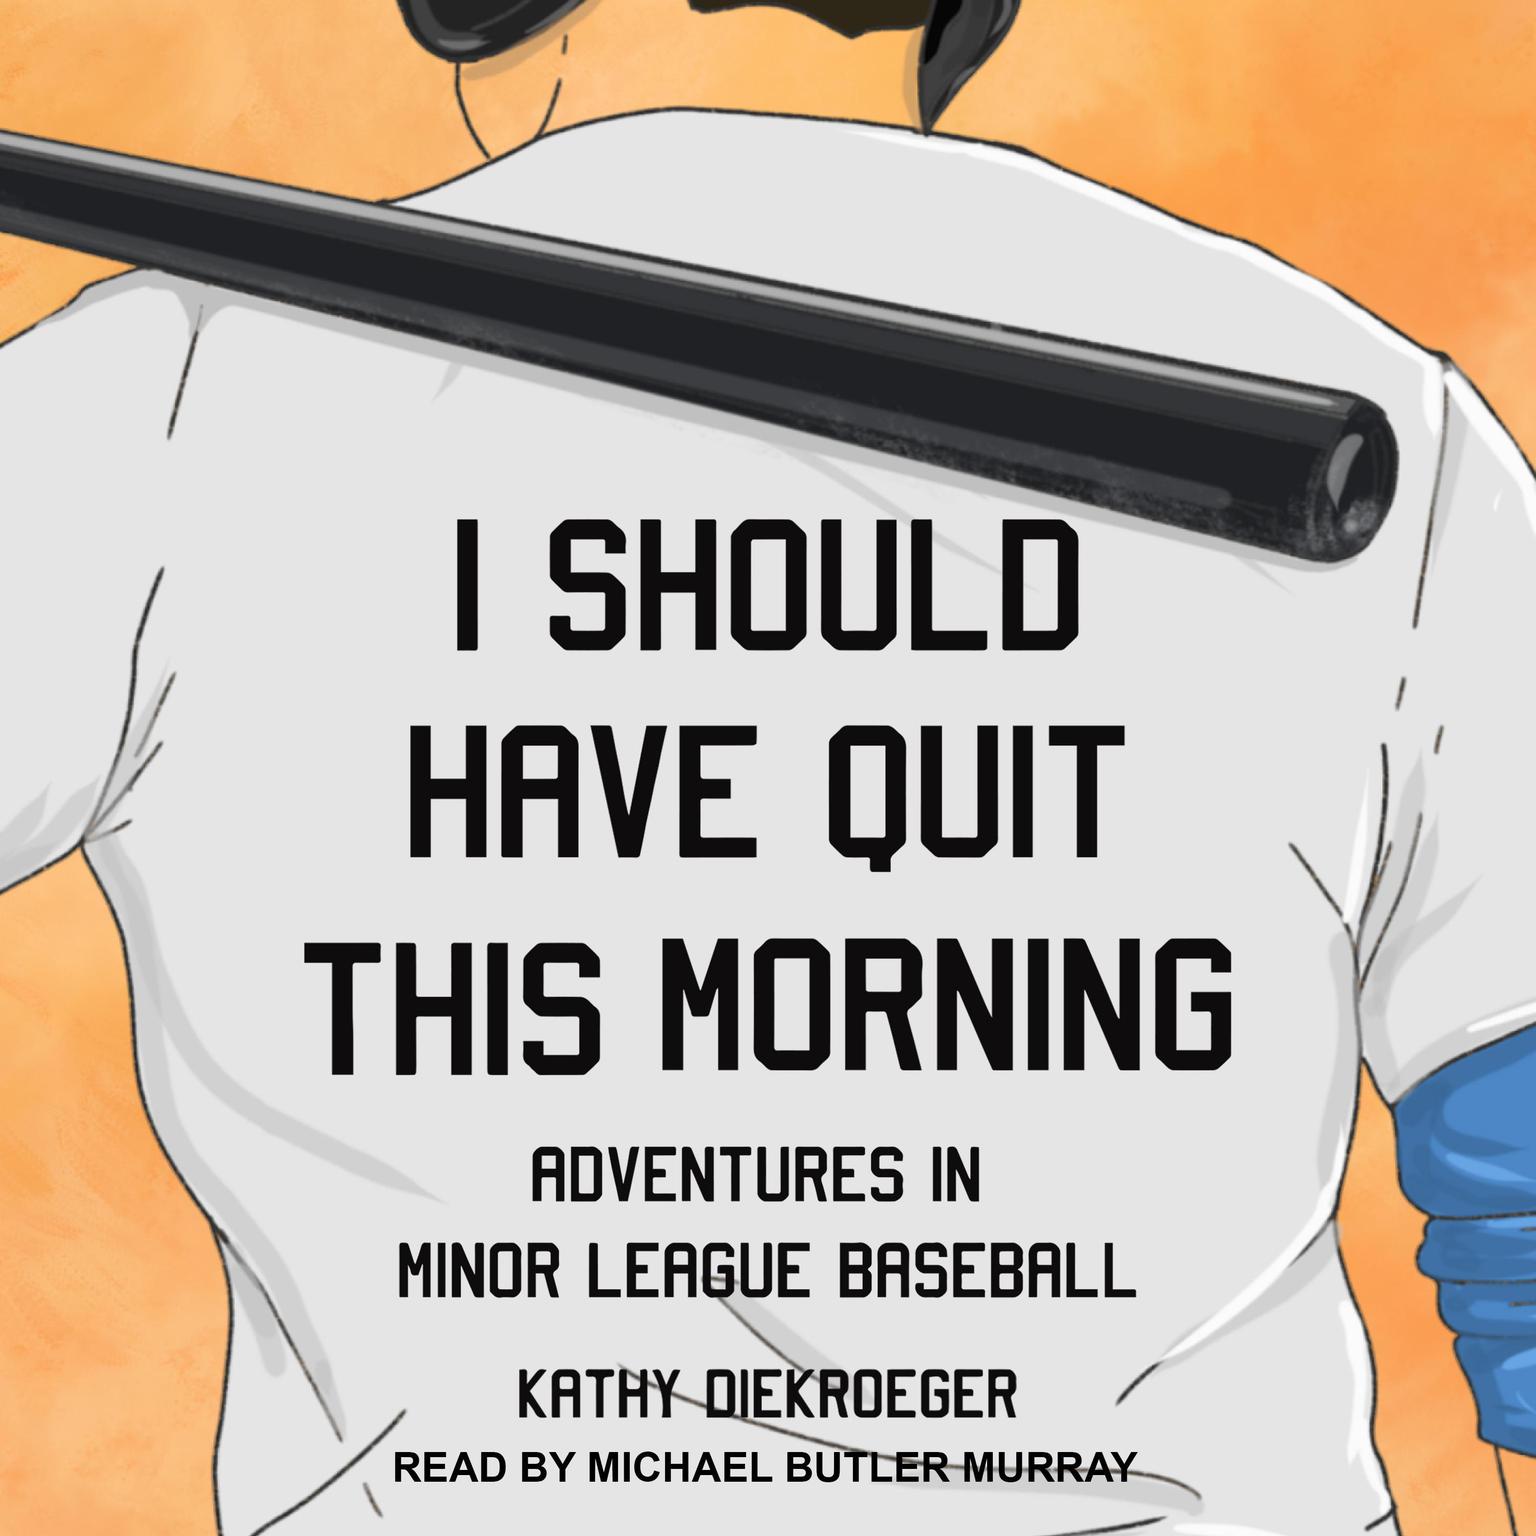 I Should Have Quit This Morning: Adventures in Minor League Baseball Audiobook, by Kathy Diekroeger